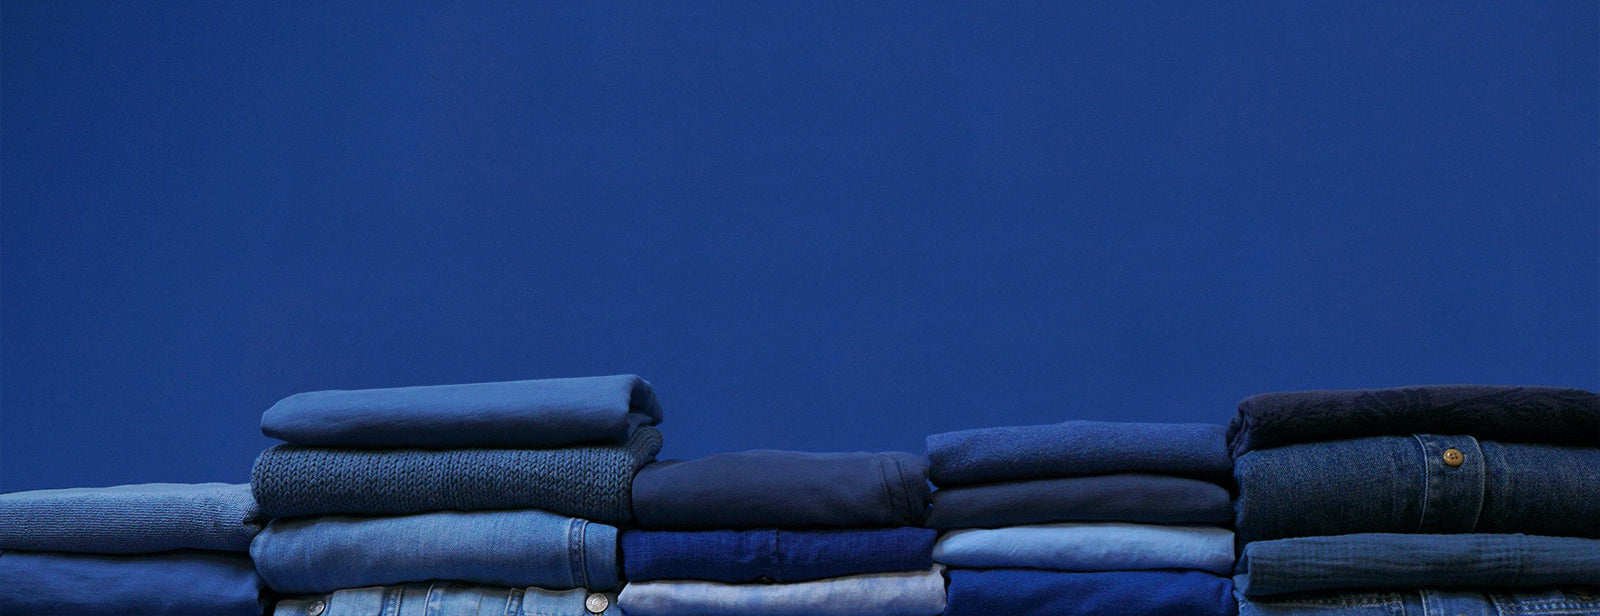 Neatly folded stacks of blue blue shirts, sweaters and denim jumpsuits in front of a blue backdrop